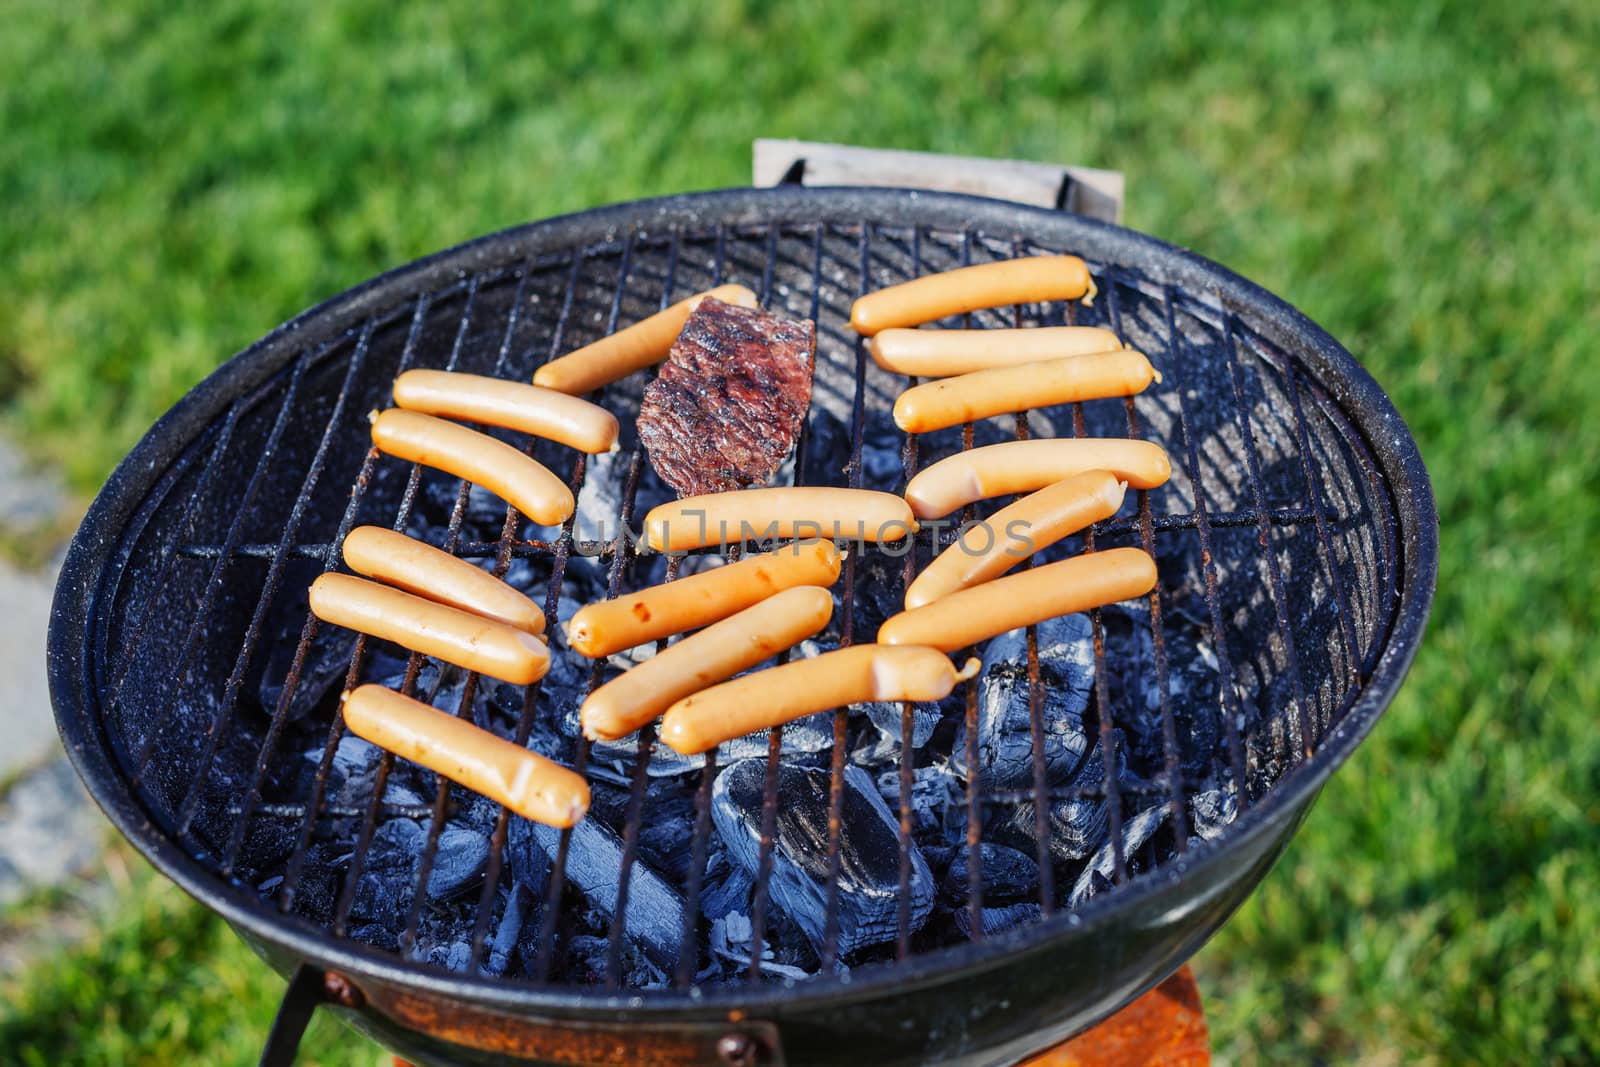 Fresh sausage and hot dogs grilling outdoors on a barbecue grill.